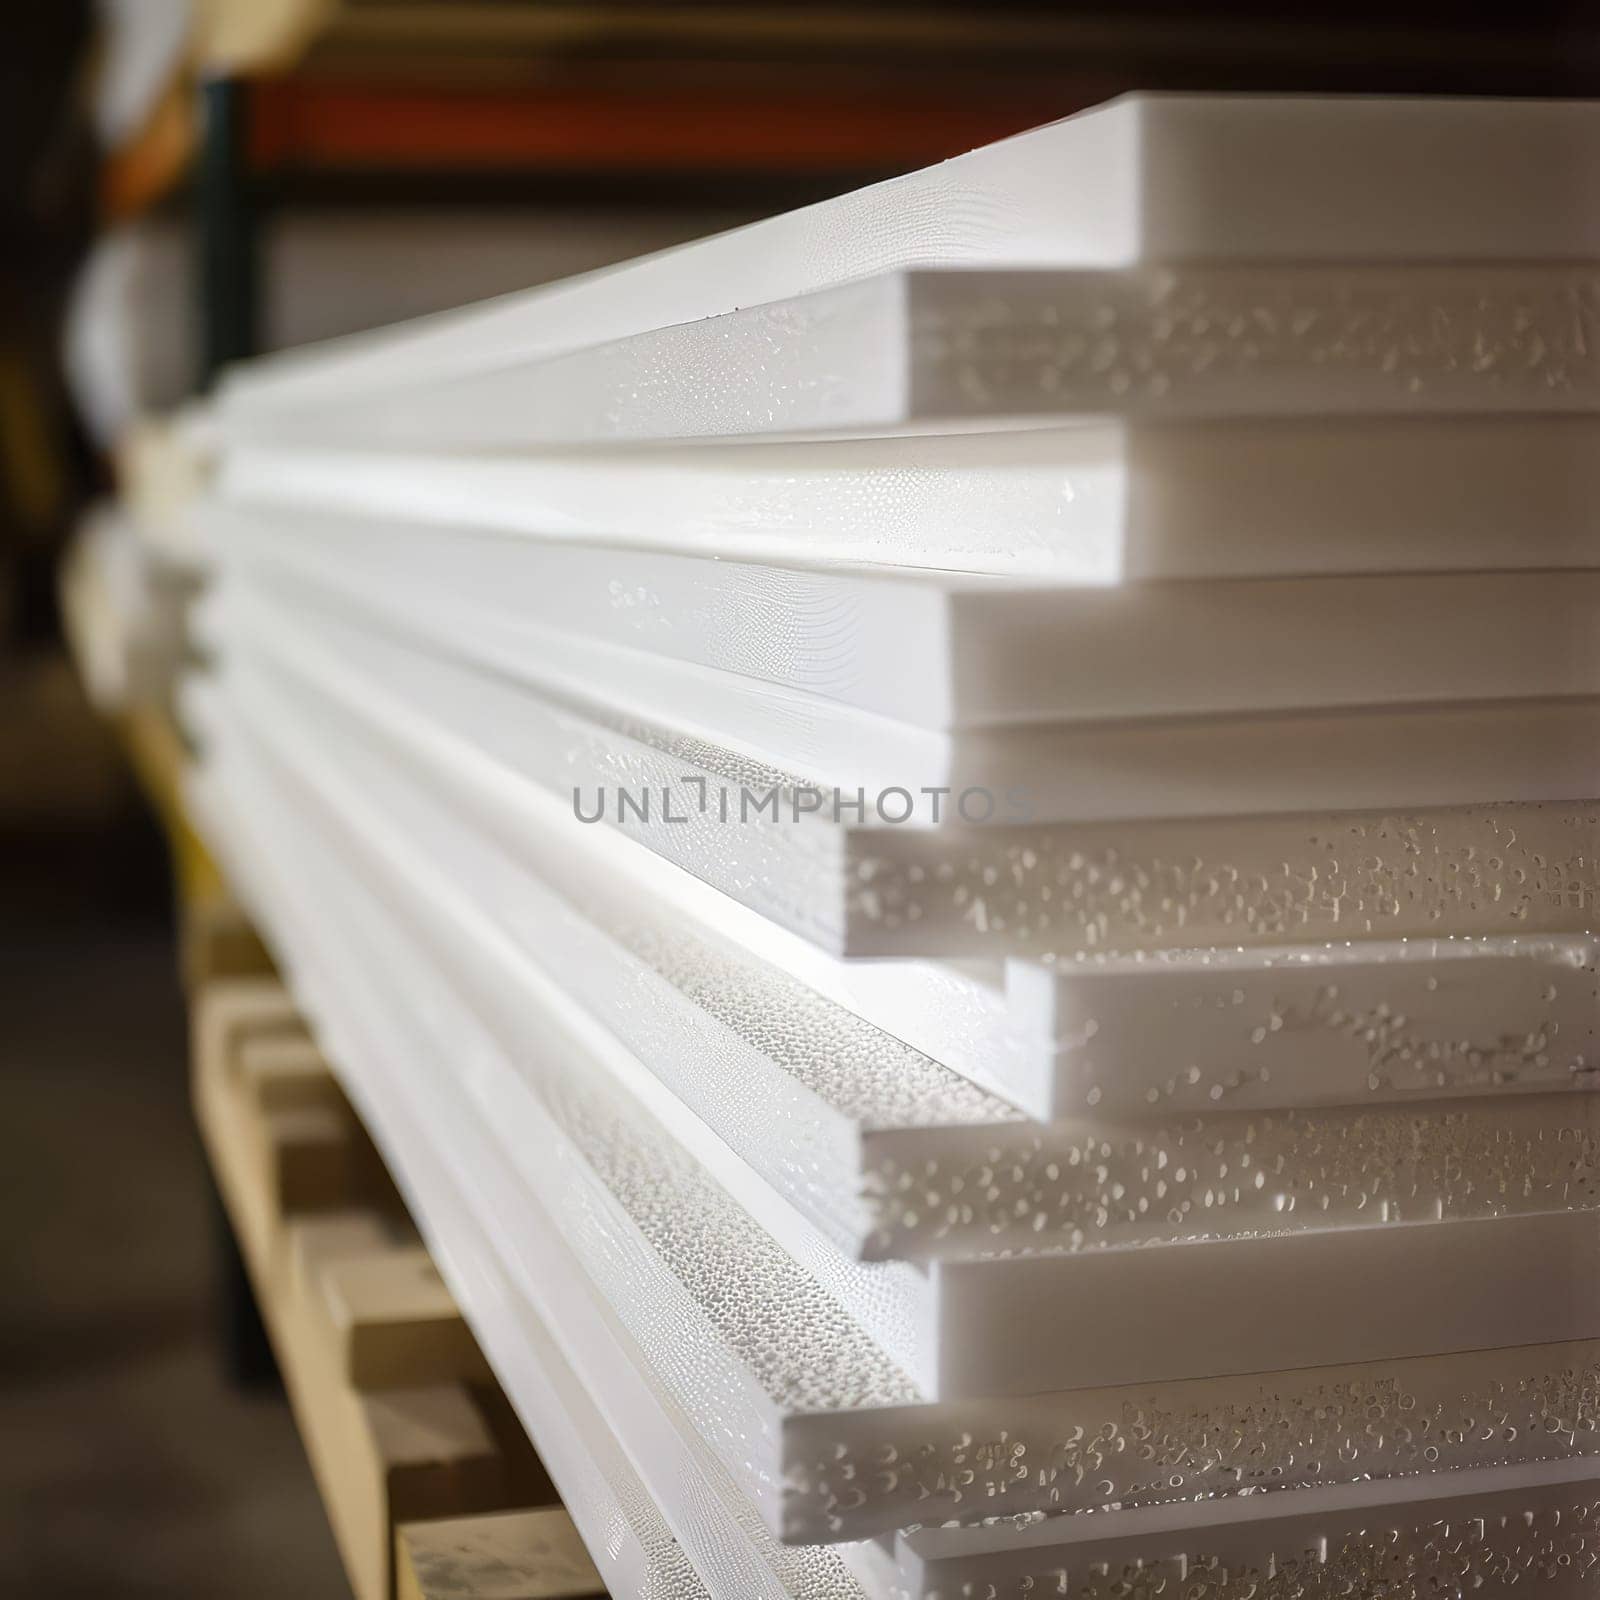 Styrofoam Board Detail: Versatile Material for Packing and Insulation Projects. Expanded polystyrene plates. A stack of building materials for house insulation. by Dvorak